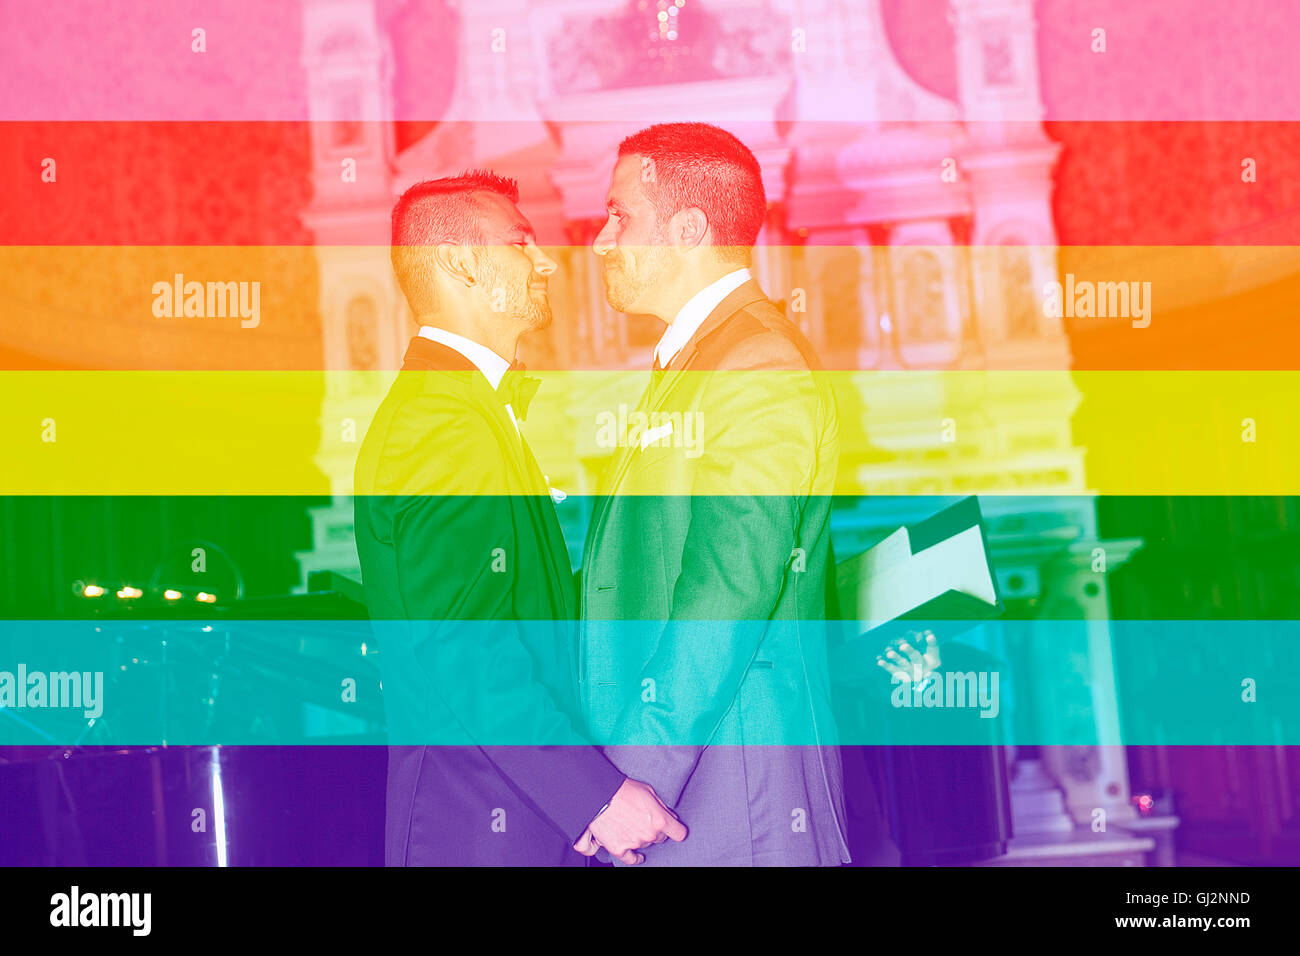 A Portrait of a loving gay male couple on their wedding day inside the church. Stock Photo